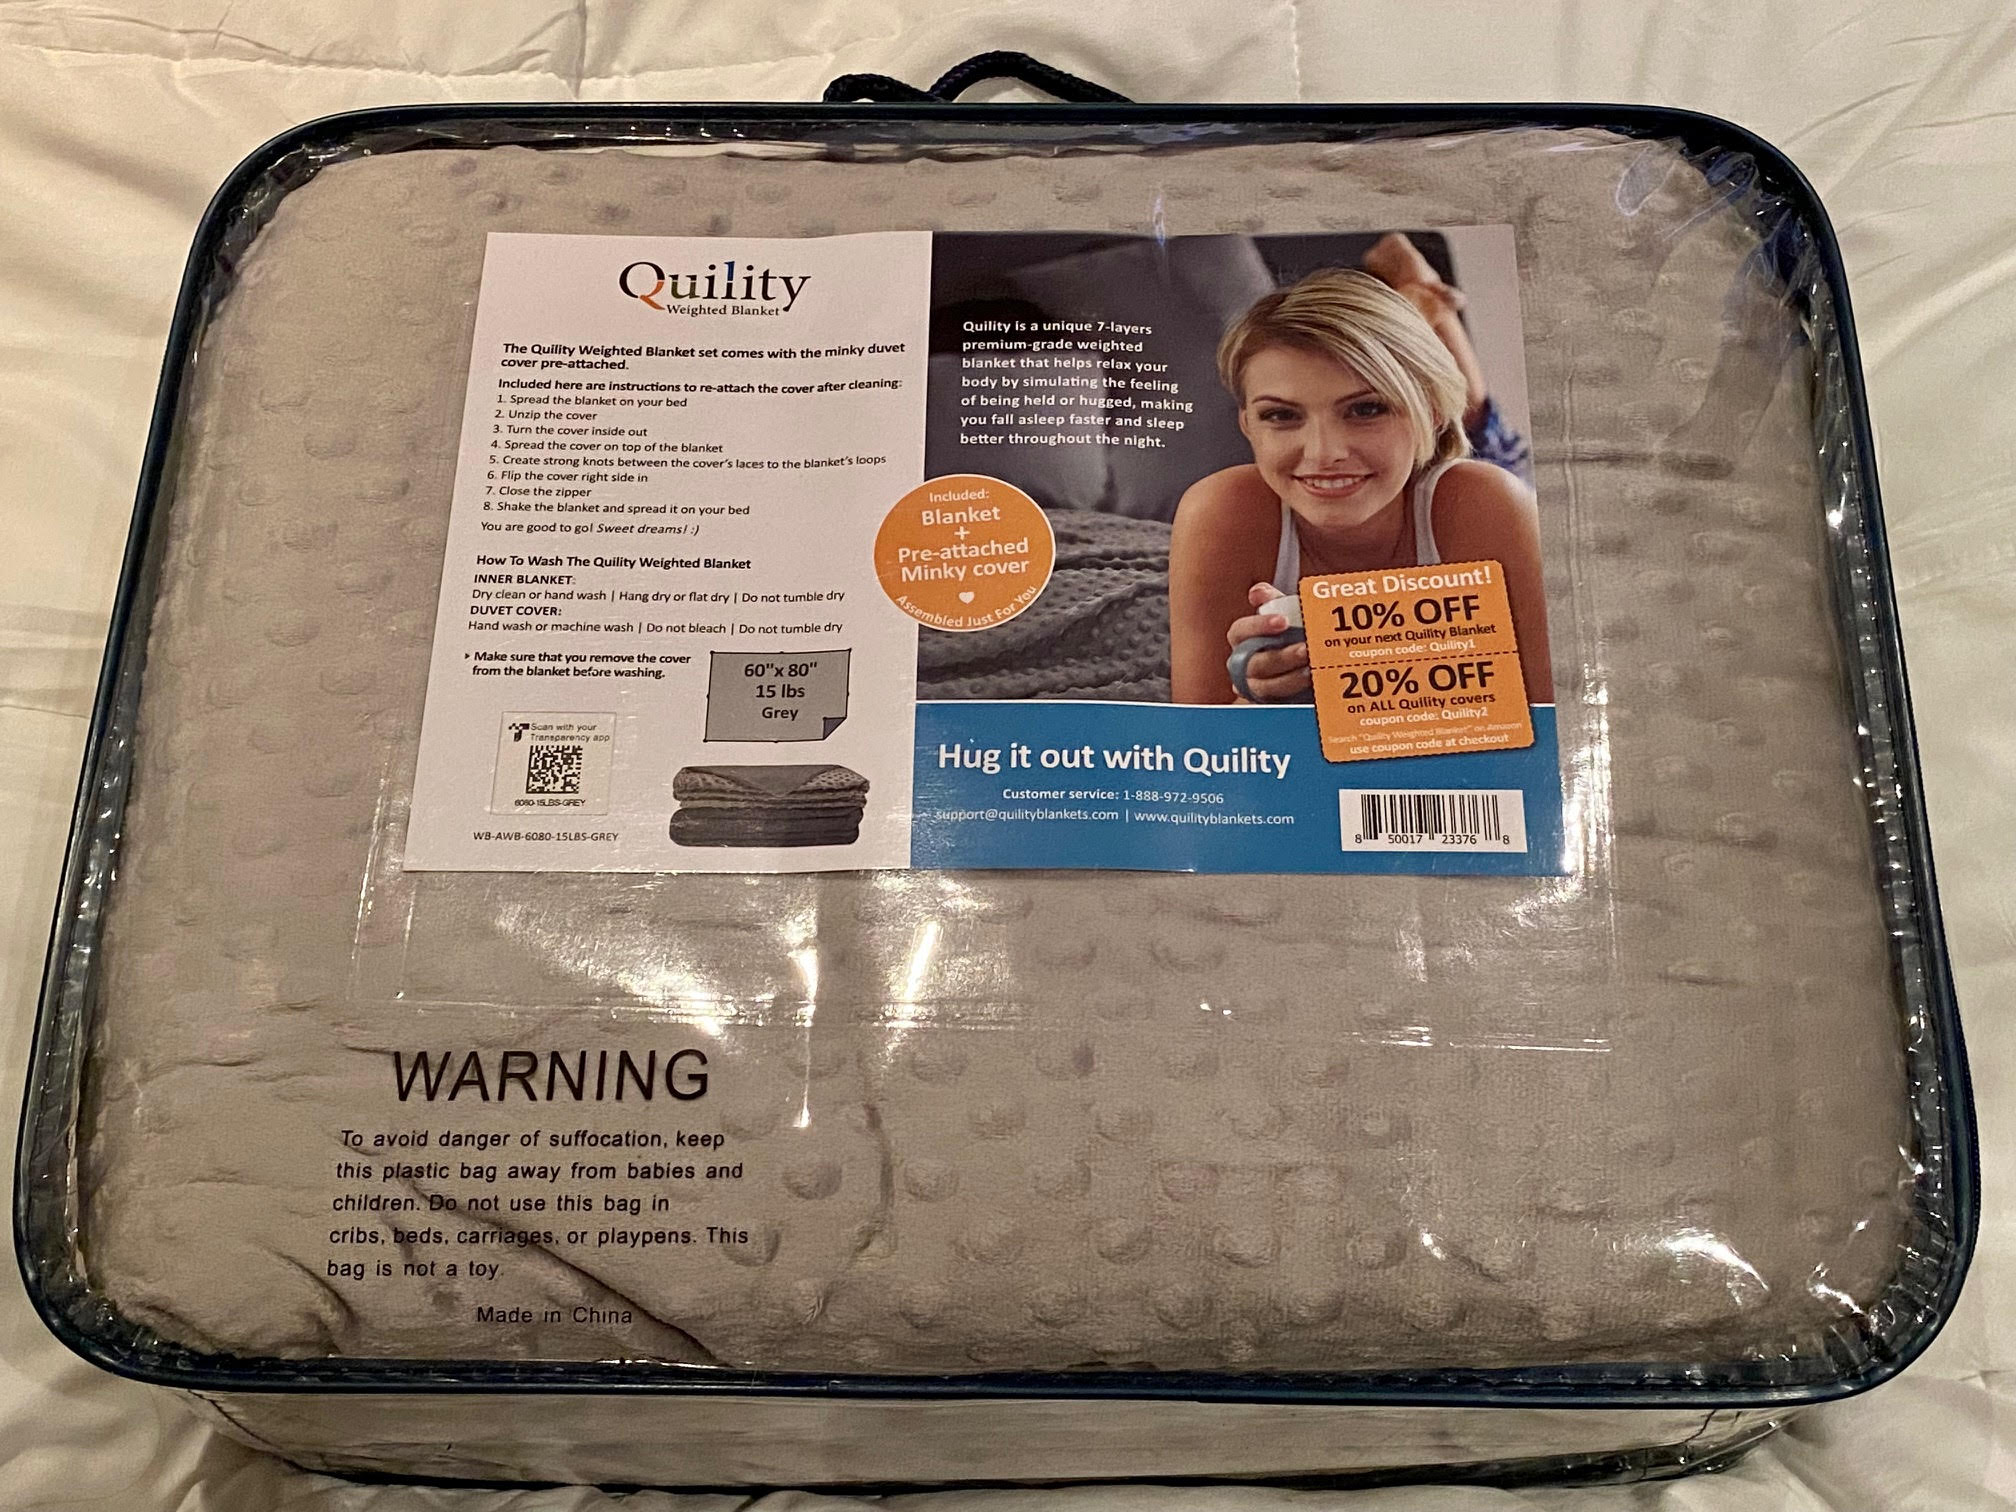 Our Review of the Quility Weighted Blanket - The Sleep Judge